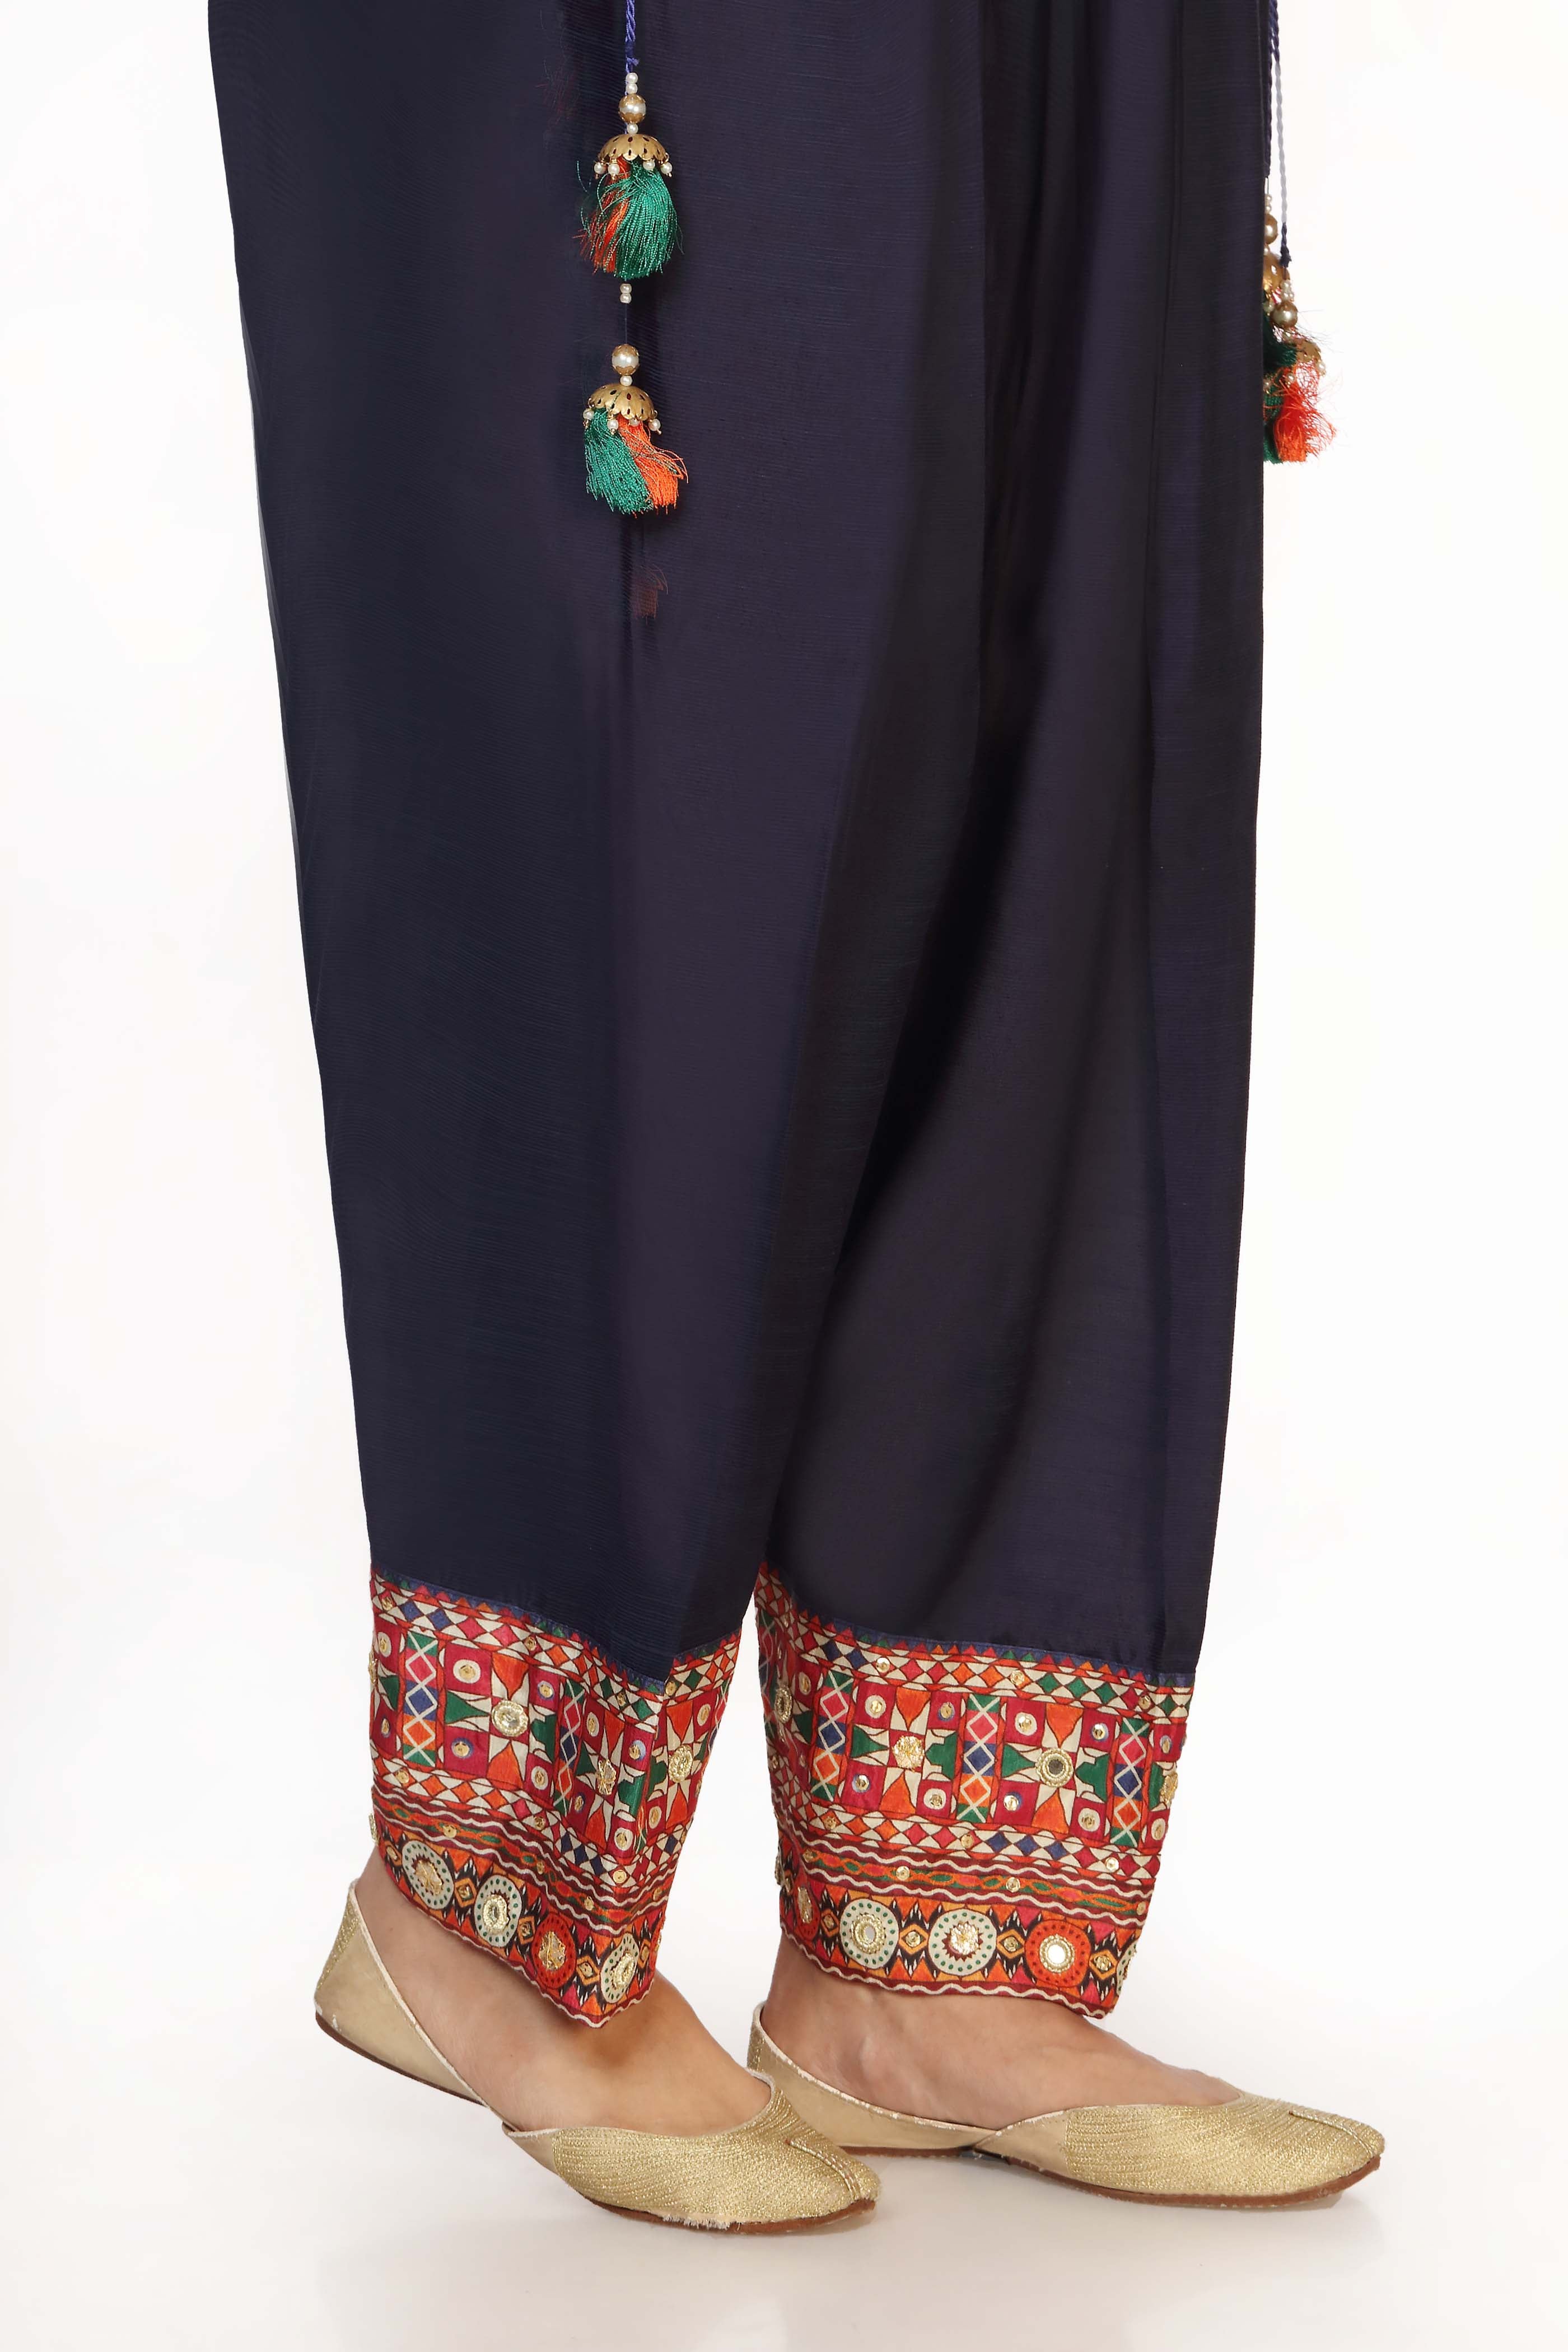 Square Shalwar in Navy Blue coloured Printed Lawn fabric 3